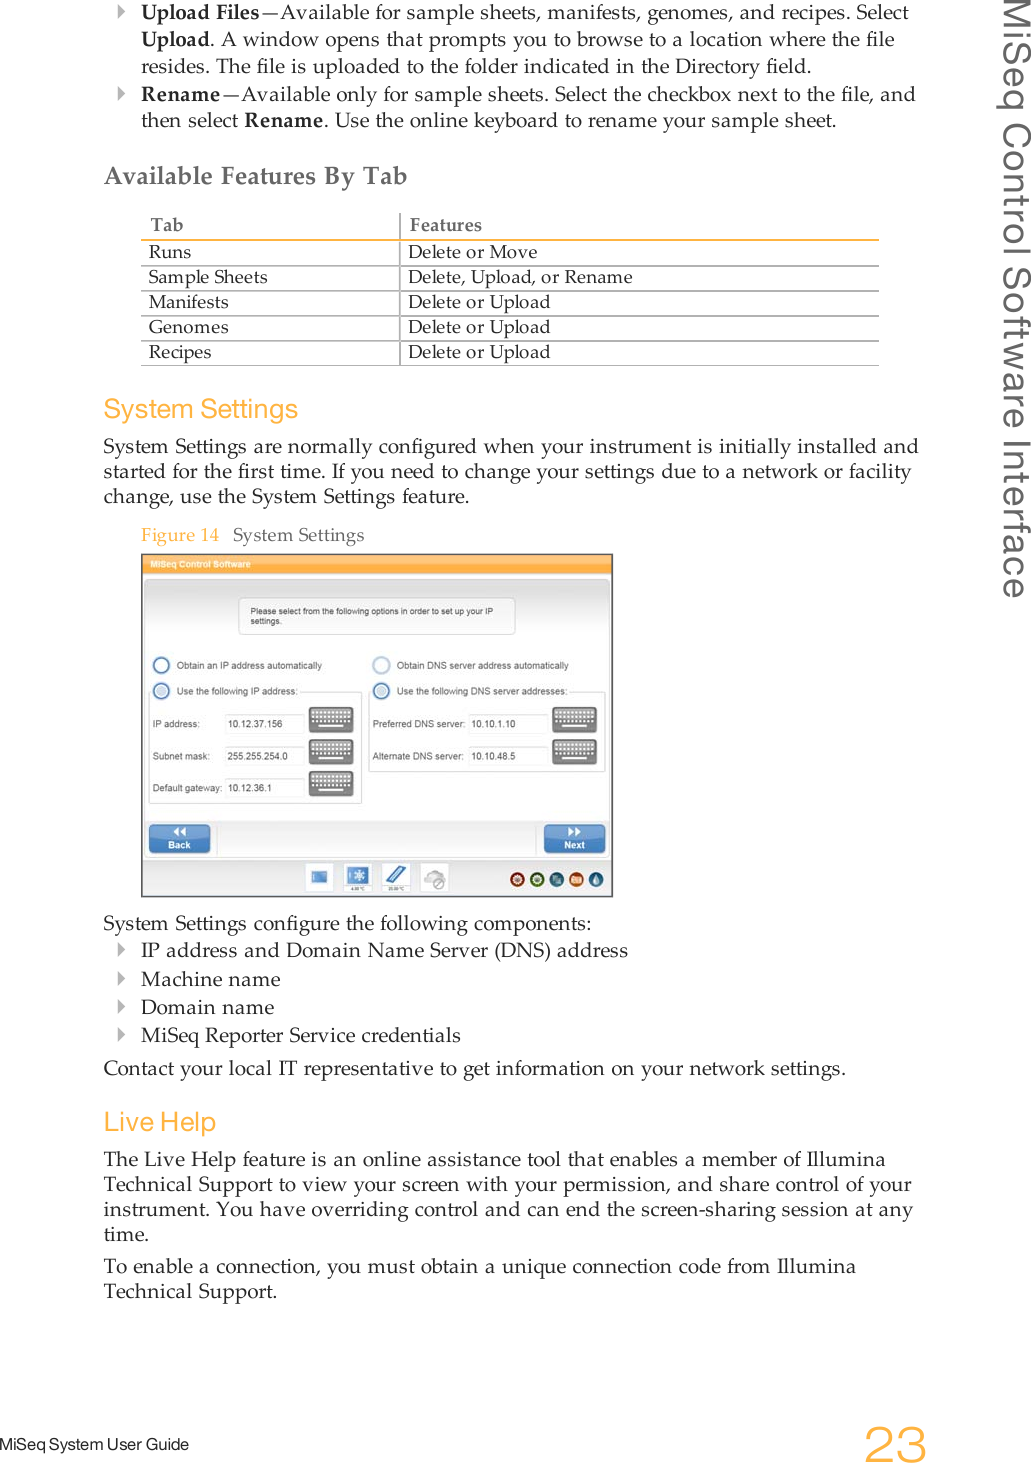 MiSeq Control Software InterfaceMiSeq System User Guide 23}Upload Files—Available for sample sheets, manifests, genomes, and recipes. SelectUpload. A window opens that prompts you to browse to a location where the fileresides. The file is uploaded to the folder indicated in the Directory field.}Rename—Available only for sample sheets. Select the checkbox next to the file, andthen select Rename. Use the online keyboard to rename your sample sheet.Available Features By TabTab FeaturesRuns Delete or MoveSample Sheets Delete, Upload, or RenameManifests Delete or UploadGenomes Delete or UploadRecipes Delete or UploadSystem SettingsSystem Settings are normally configured when your instrument is initially installed andstarted for the first time. If you need to change your settings due to a network or facilitychange, use the System Settings feature.Figure 14 System SettingsSystem Settings configure the following components:}IP address and Domain Name Server (DNS) address}Machine name}Domain name}MiSeq Reporter Service credentialsContact your local IT representative to get information on your network settings.Live HelpThe Live Help feature is an online assistance tool that enables a member of IlluminaTechnical Support to view your screen with your permission, and share control of yourinstrument. You have overriding control and can end the screen-sharing session at anytime.To enable a connection, you must obtain a unique connection code from IlluminaTechnical Support.